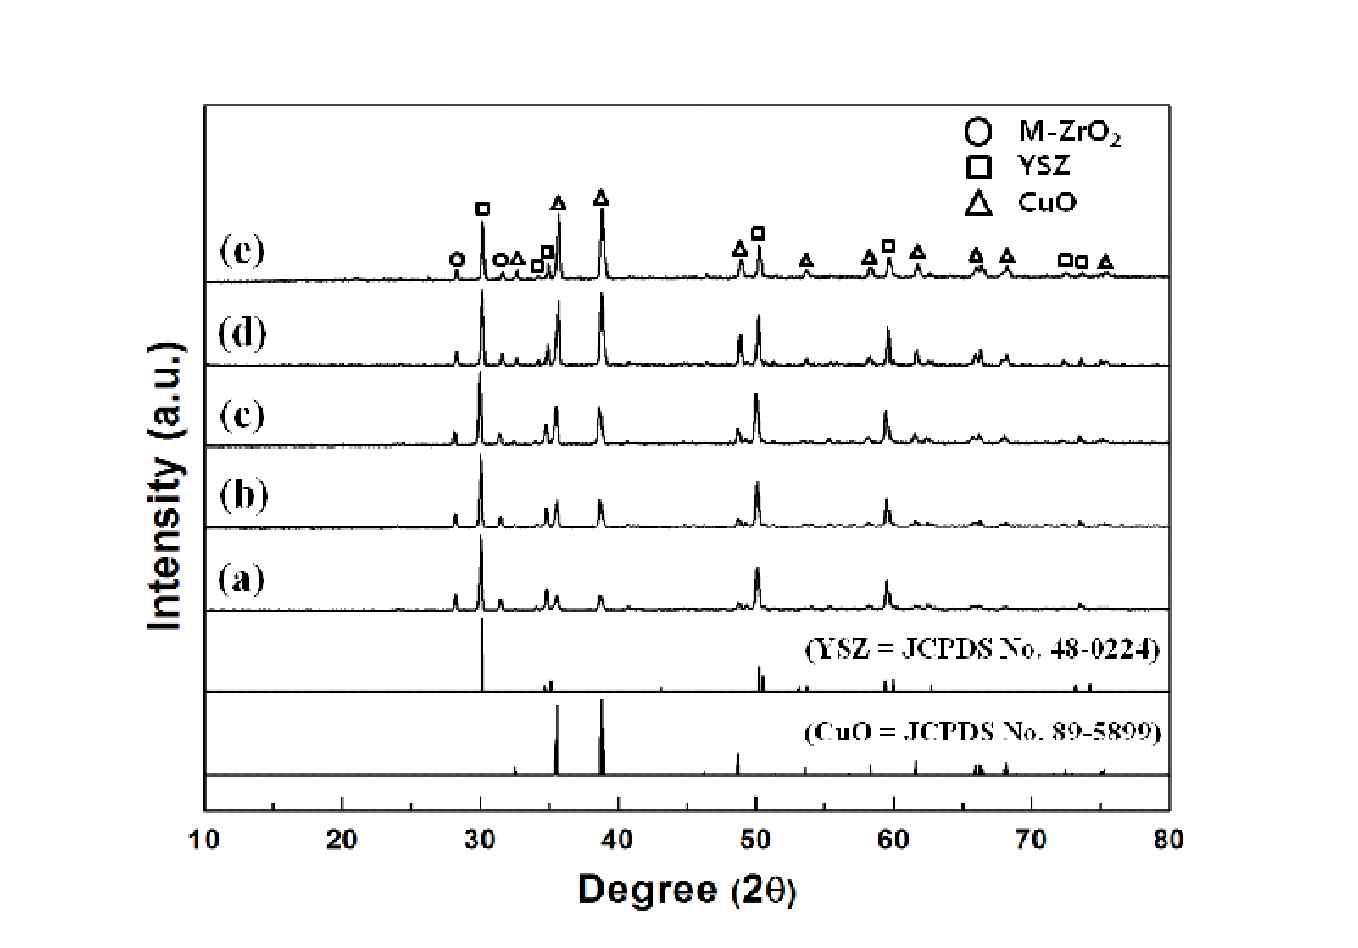 XRD patterns of the samples sintered at 1,100 °C for 3 h: (a) Sample 30AC, (b) Sample 40AC, (c) Sample 50AC, (d) Sample 60AC, and (e) Sample 70AC.